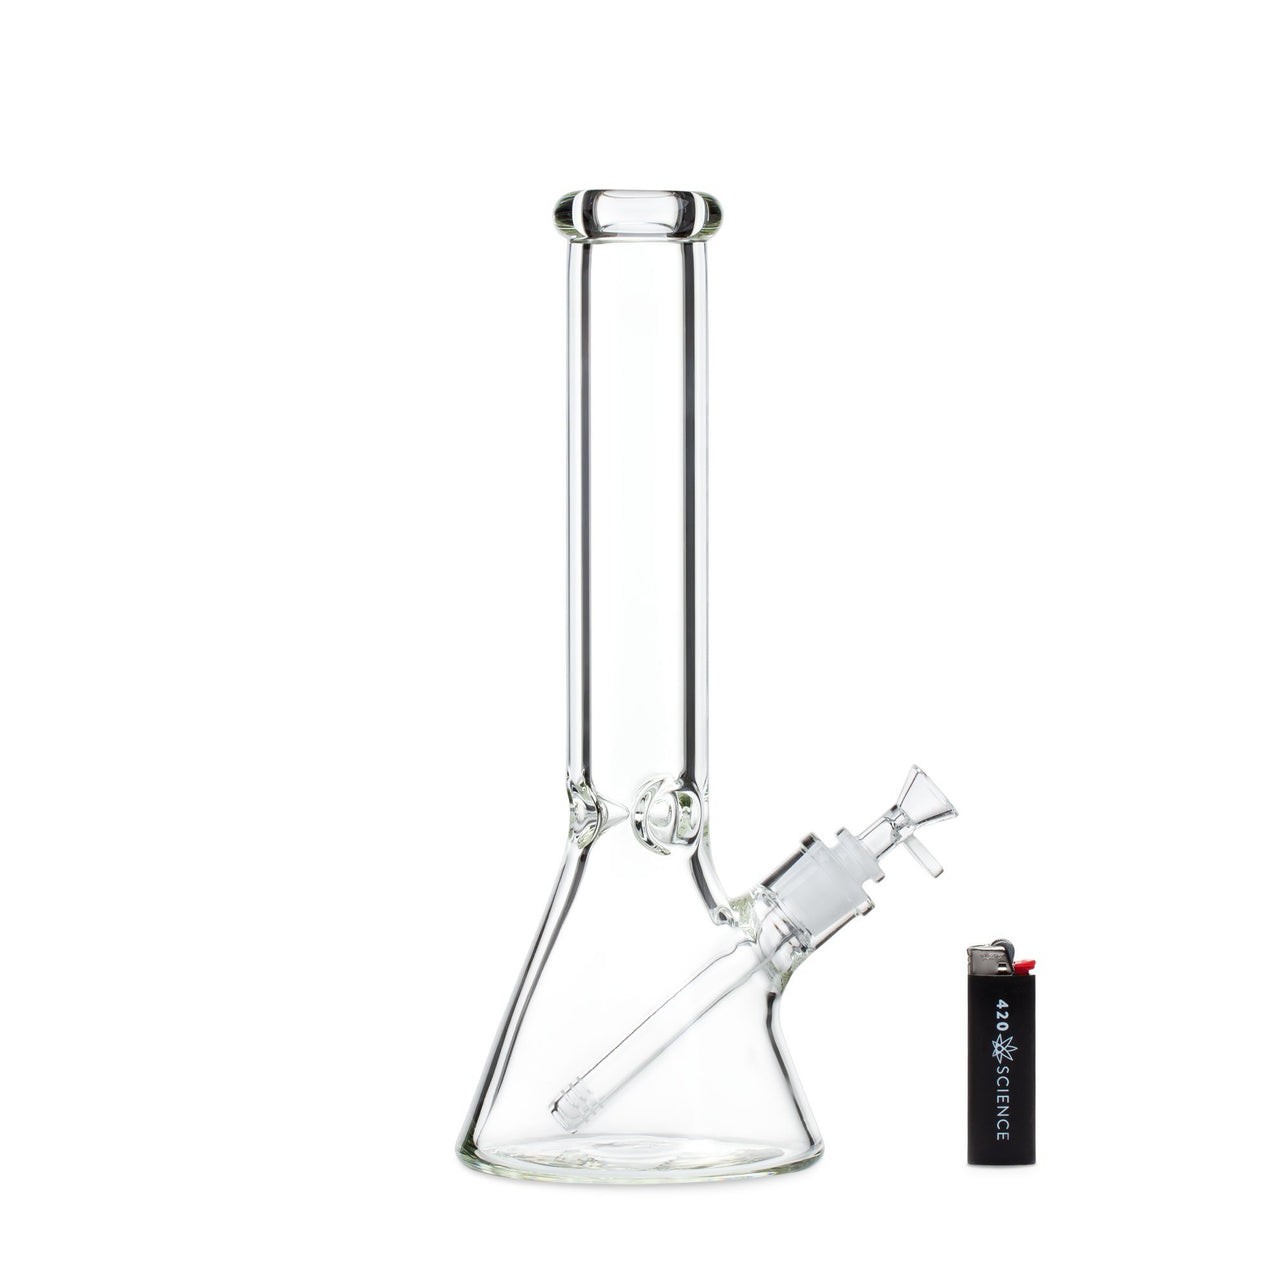 7 Pipe Twisty Mini Glass Blunt / $ 34.99 at 420 Science